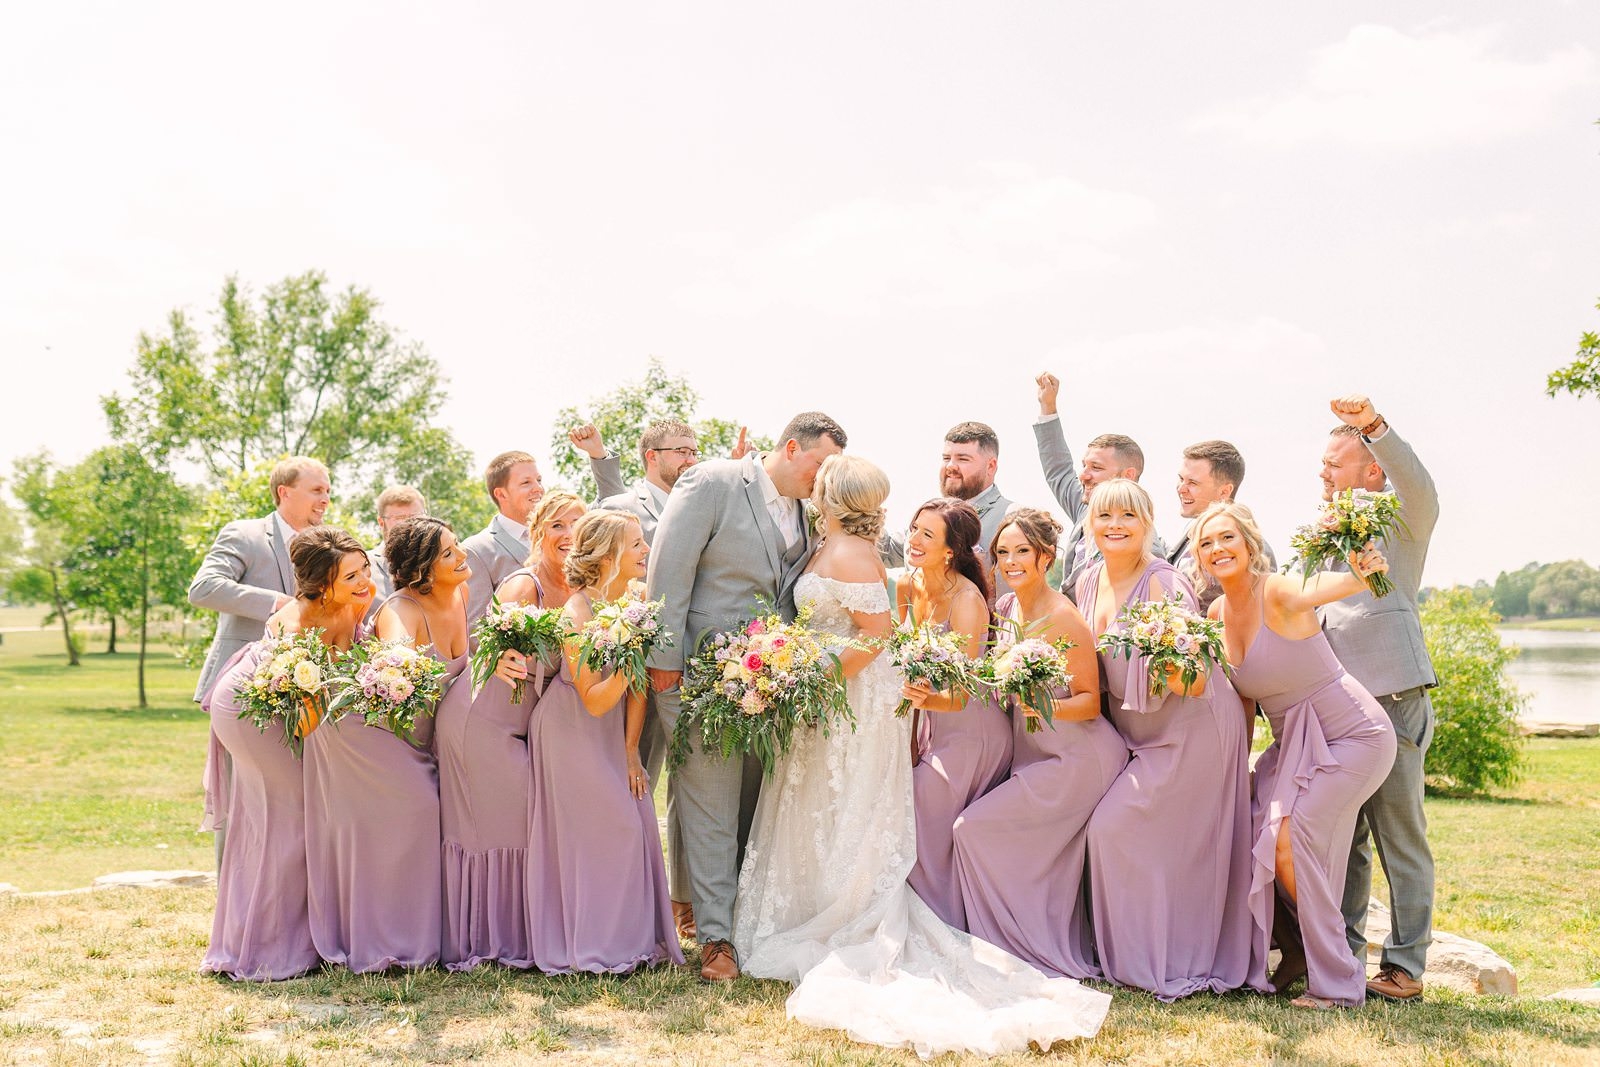 A Sunny Summer Wedding at Friedman Park in Newburgh Indiana | Paige and Dylan | Bret and Brandie Photography105.jpg